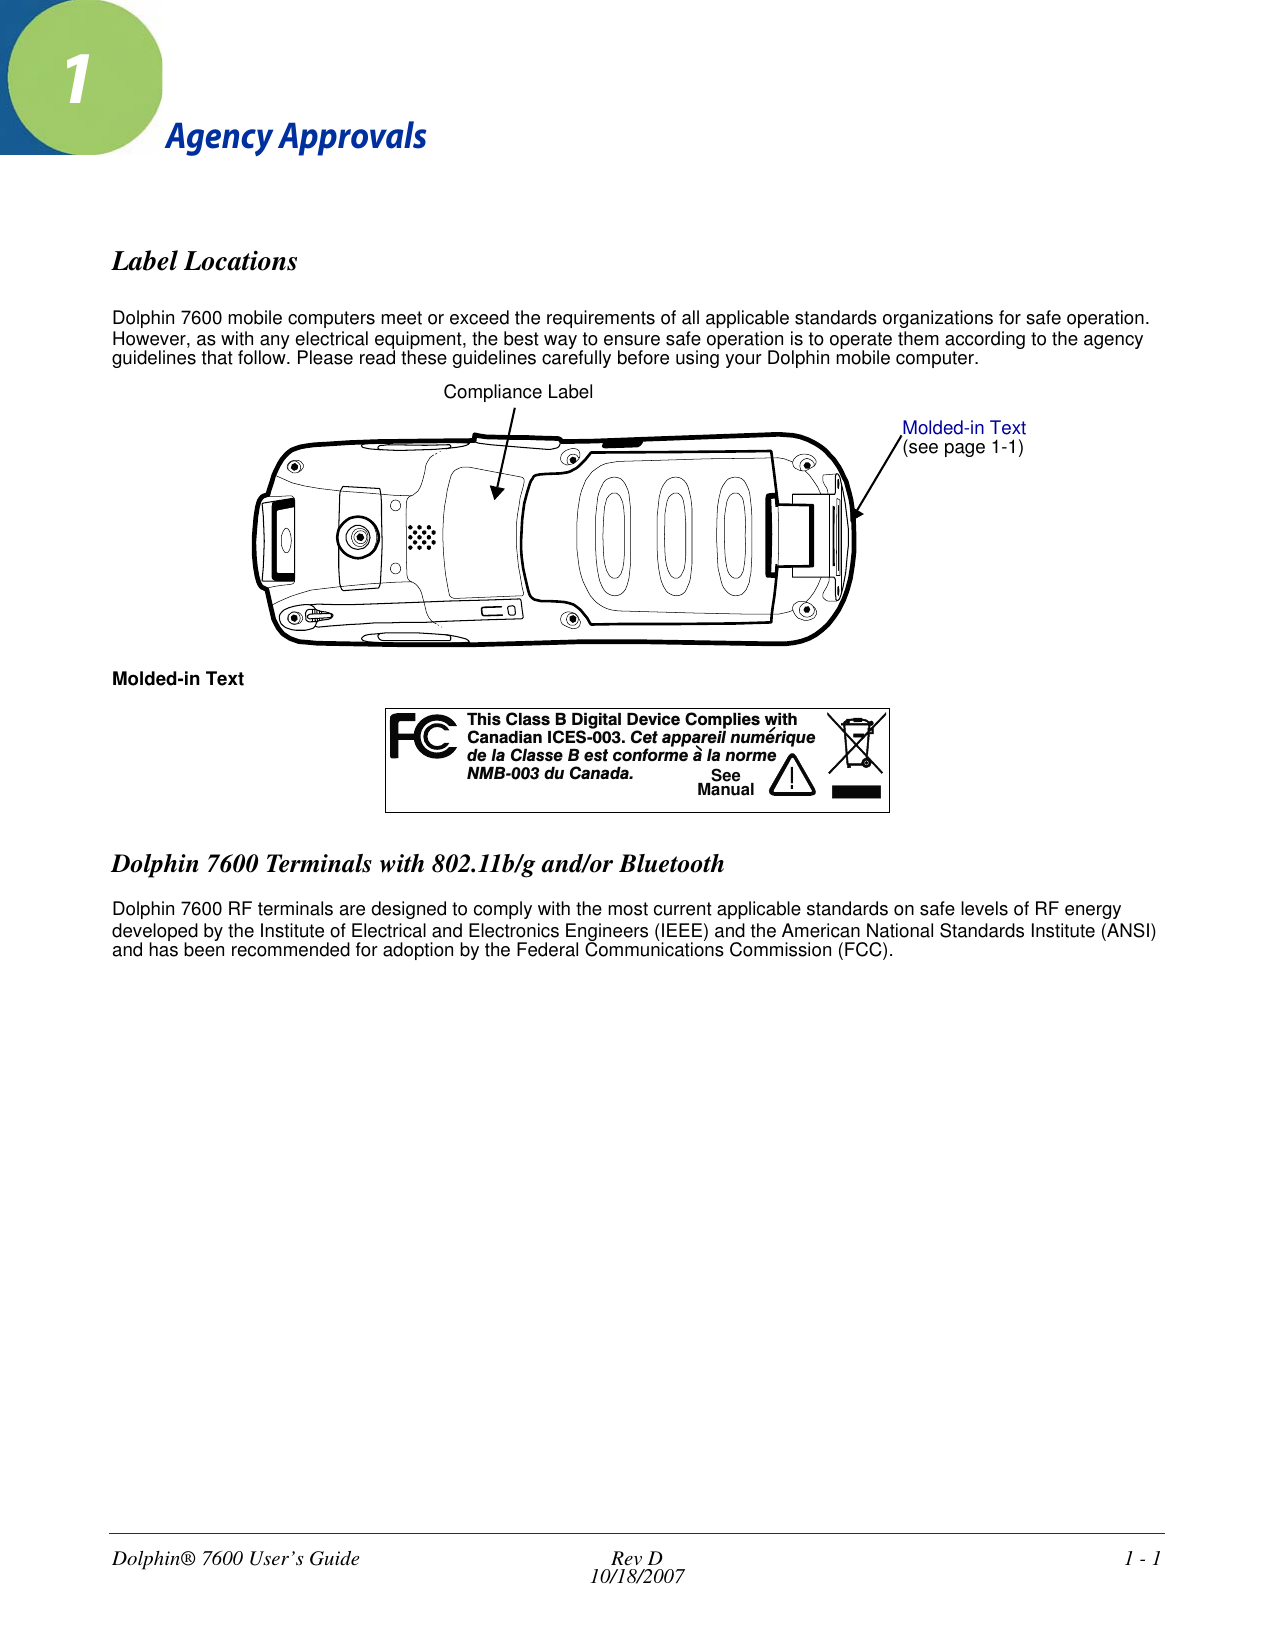 Dolphin® 7600 User’s Guide  Rev D10/18/2007 1 - 11Agency ApprovalsLabel LocationsDolphin 7600 mobile computers meet or exceed the requirements of all applicable standards organizations for safe operation. However, as with any electrical equipment, the best way to ensure safe operation is to operate them according to the agency guidelines that follow. Please read these guidelines carefully before using your Dolphin mobile computer. Molded-in TextDolphin 7600 Terminals with 802.11b/g and/or BluetoothDolphin 7600 RF terminals are designed to comply with the most current applicable standards on safe levels of RF energy developed by the Institute of Electrical and Electronics Engineers (IEEE) and the American National Standards Institute (ANSI) and has been recommended for adoption by the Federal Communications Commission (FCC). Compliance LabelMolded-in Text (see page 1-1)hs a s i t D c C m i tTi Cl s B D gi al evi e o pl es wi hCndiI -00 eaai m uaa anCES3.Ct pprel nu eriq ed l C s e B es con e a a ormea lastform l n e00 u n aNMB- 3 dCaad .!SeeManual